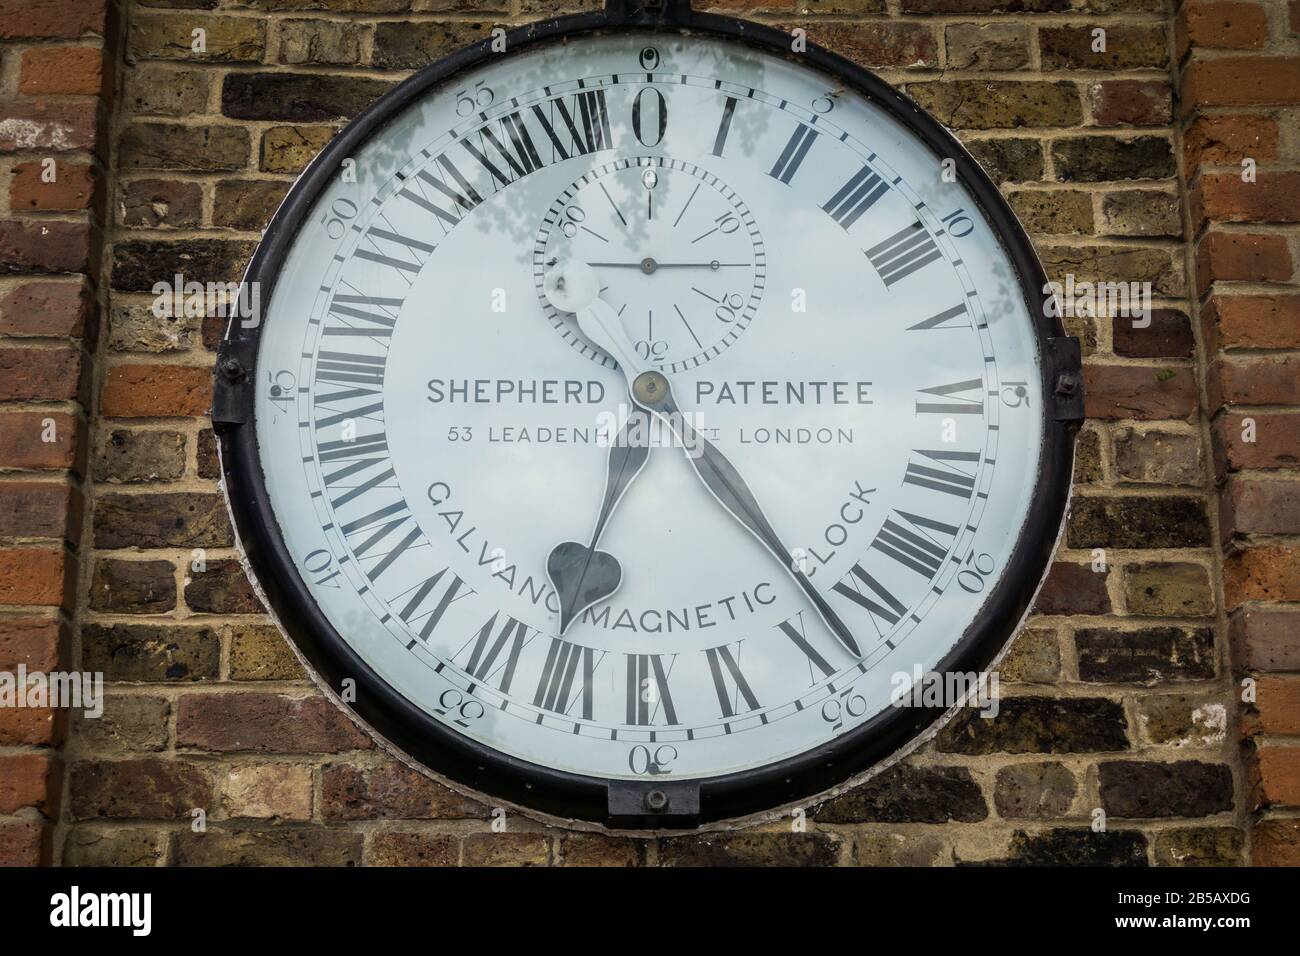 The Shepherd 24-hour gate clock at the Royal Observatory in Greenwich, London, England Stock Photo